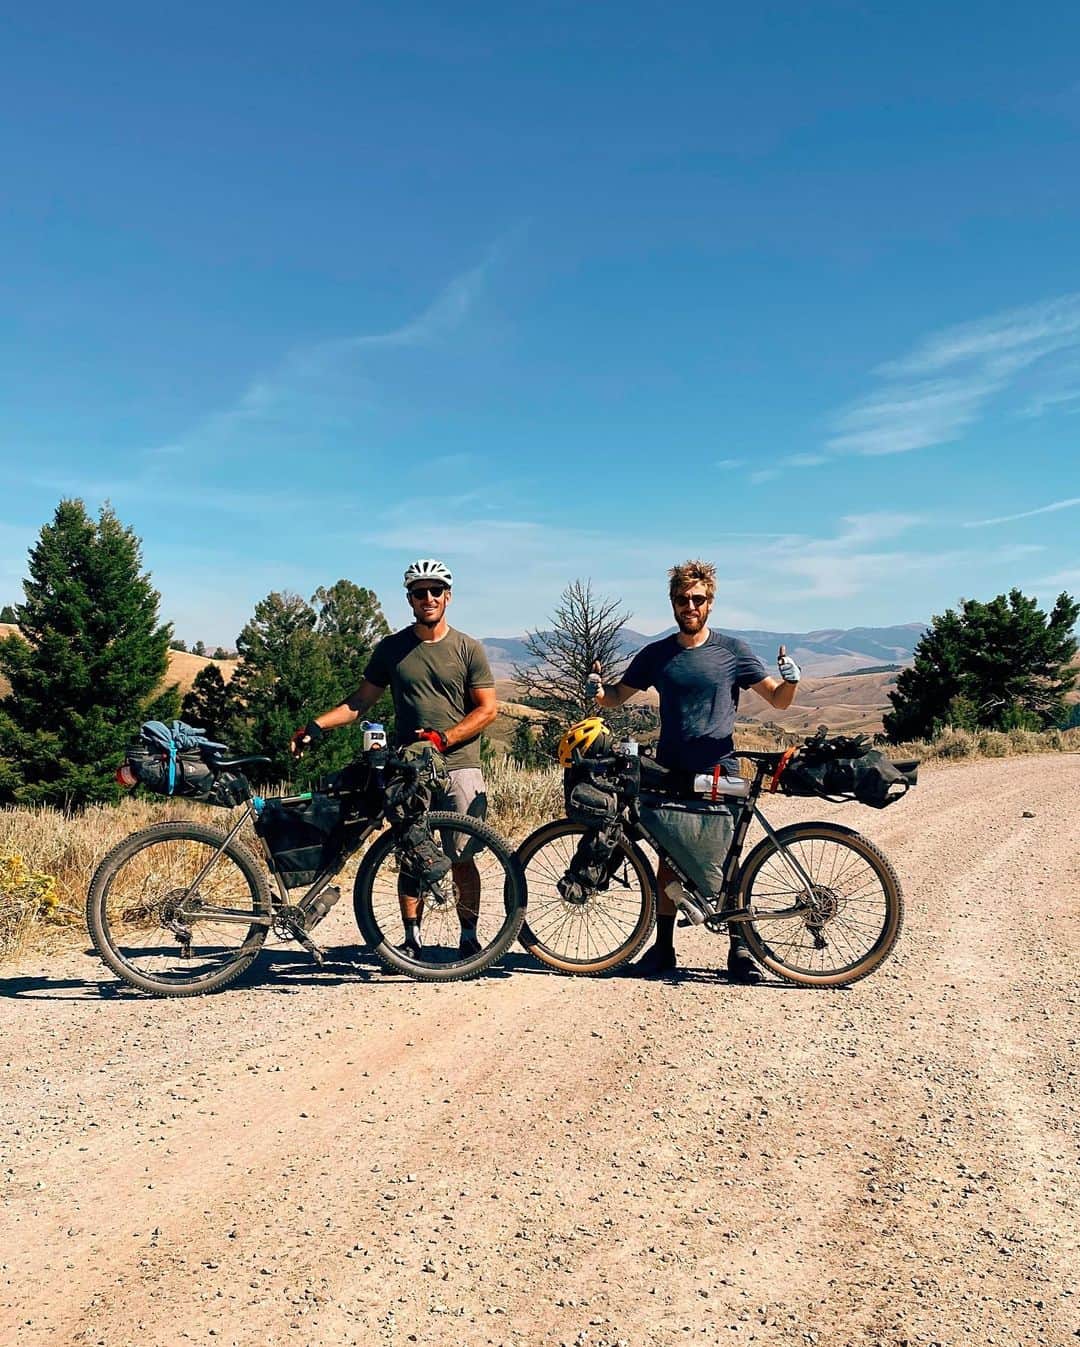 Alex Strohlさんのインスタグラム写真 - (Alex StrohlInstagram)「The final stage of the Gravel Ride Across Montana! We finally crossed into Idaho after a few days of heinous headwinds 🤪 and 505 miles of total riding.   People have asked what was the highlight of the trip and to me it was definitely being away from cell service for long periods of time. Whenever we’d go into town and inevitably get service it would become this stressful event where you feel like you have to catch up with the daily internet noise. Such a beautiful feeling knowing that no-one expects anything from you when you’re off grid... I’m going to miss that! Thanks to all of you guys who’ve sent messages of encouragement along the way, means a lot to me.  Photo captions below: #1: the final day Crossing Lehmi Pass and seeing Idaho for the first time on the other side. The end of the ride... #2: the route we took consisted of a lot of gravel roads that @isaacsjohnston meticulously researched & improvised at the same time.  #3: Our typical post dinner reading time. This was a special night as night temps were going to be under 35 degrees and we got a last minute booking at this epic USFS cabin by a lake. #4: On the last day, heading towards our final climb. Headwind: ON. #5: trying to get 5000 calories per day involved some drastic menu options #6: @isaacsjohnston filming sunrise at Twin Lakes, MT. #7: climbing another pass into the Big Hole Valley #8: The winds have finally calmed for our last night on the road.  #9: Typical scene of the Big Hole Valley, what a gem of a place. The entire valley seems to be sub-irrigated and the grass is still green in late August / early sept!  #10: one of my favorite section of roads during the trip near Georgetown Lake.   The film photos of the trip are in @statefilm’s capable hands and I cannot wait to see the first rolls come out.. If you want to hear about the book release, sign up to my newsletter on my site 🙏🏻」9月12日 11時27分 - alexstrohl